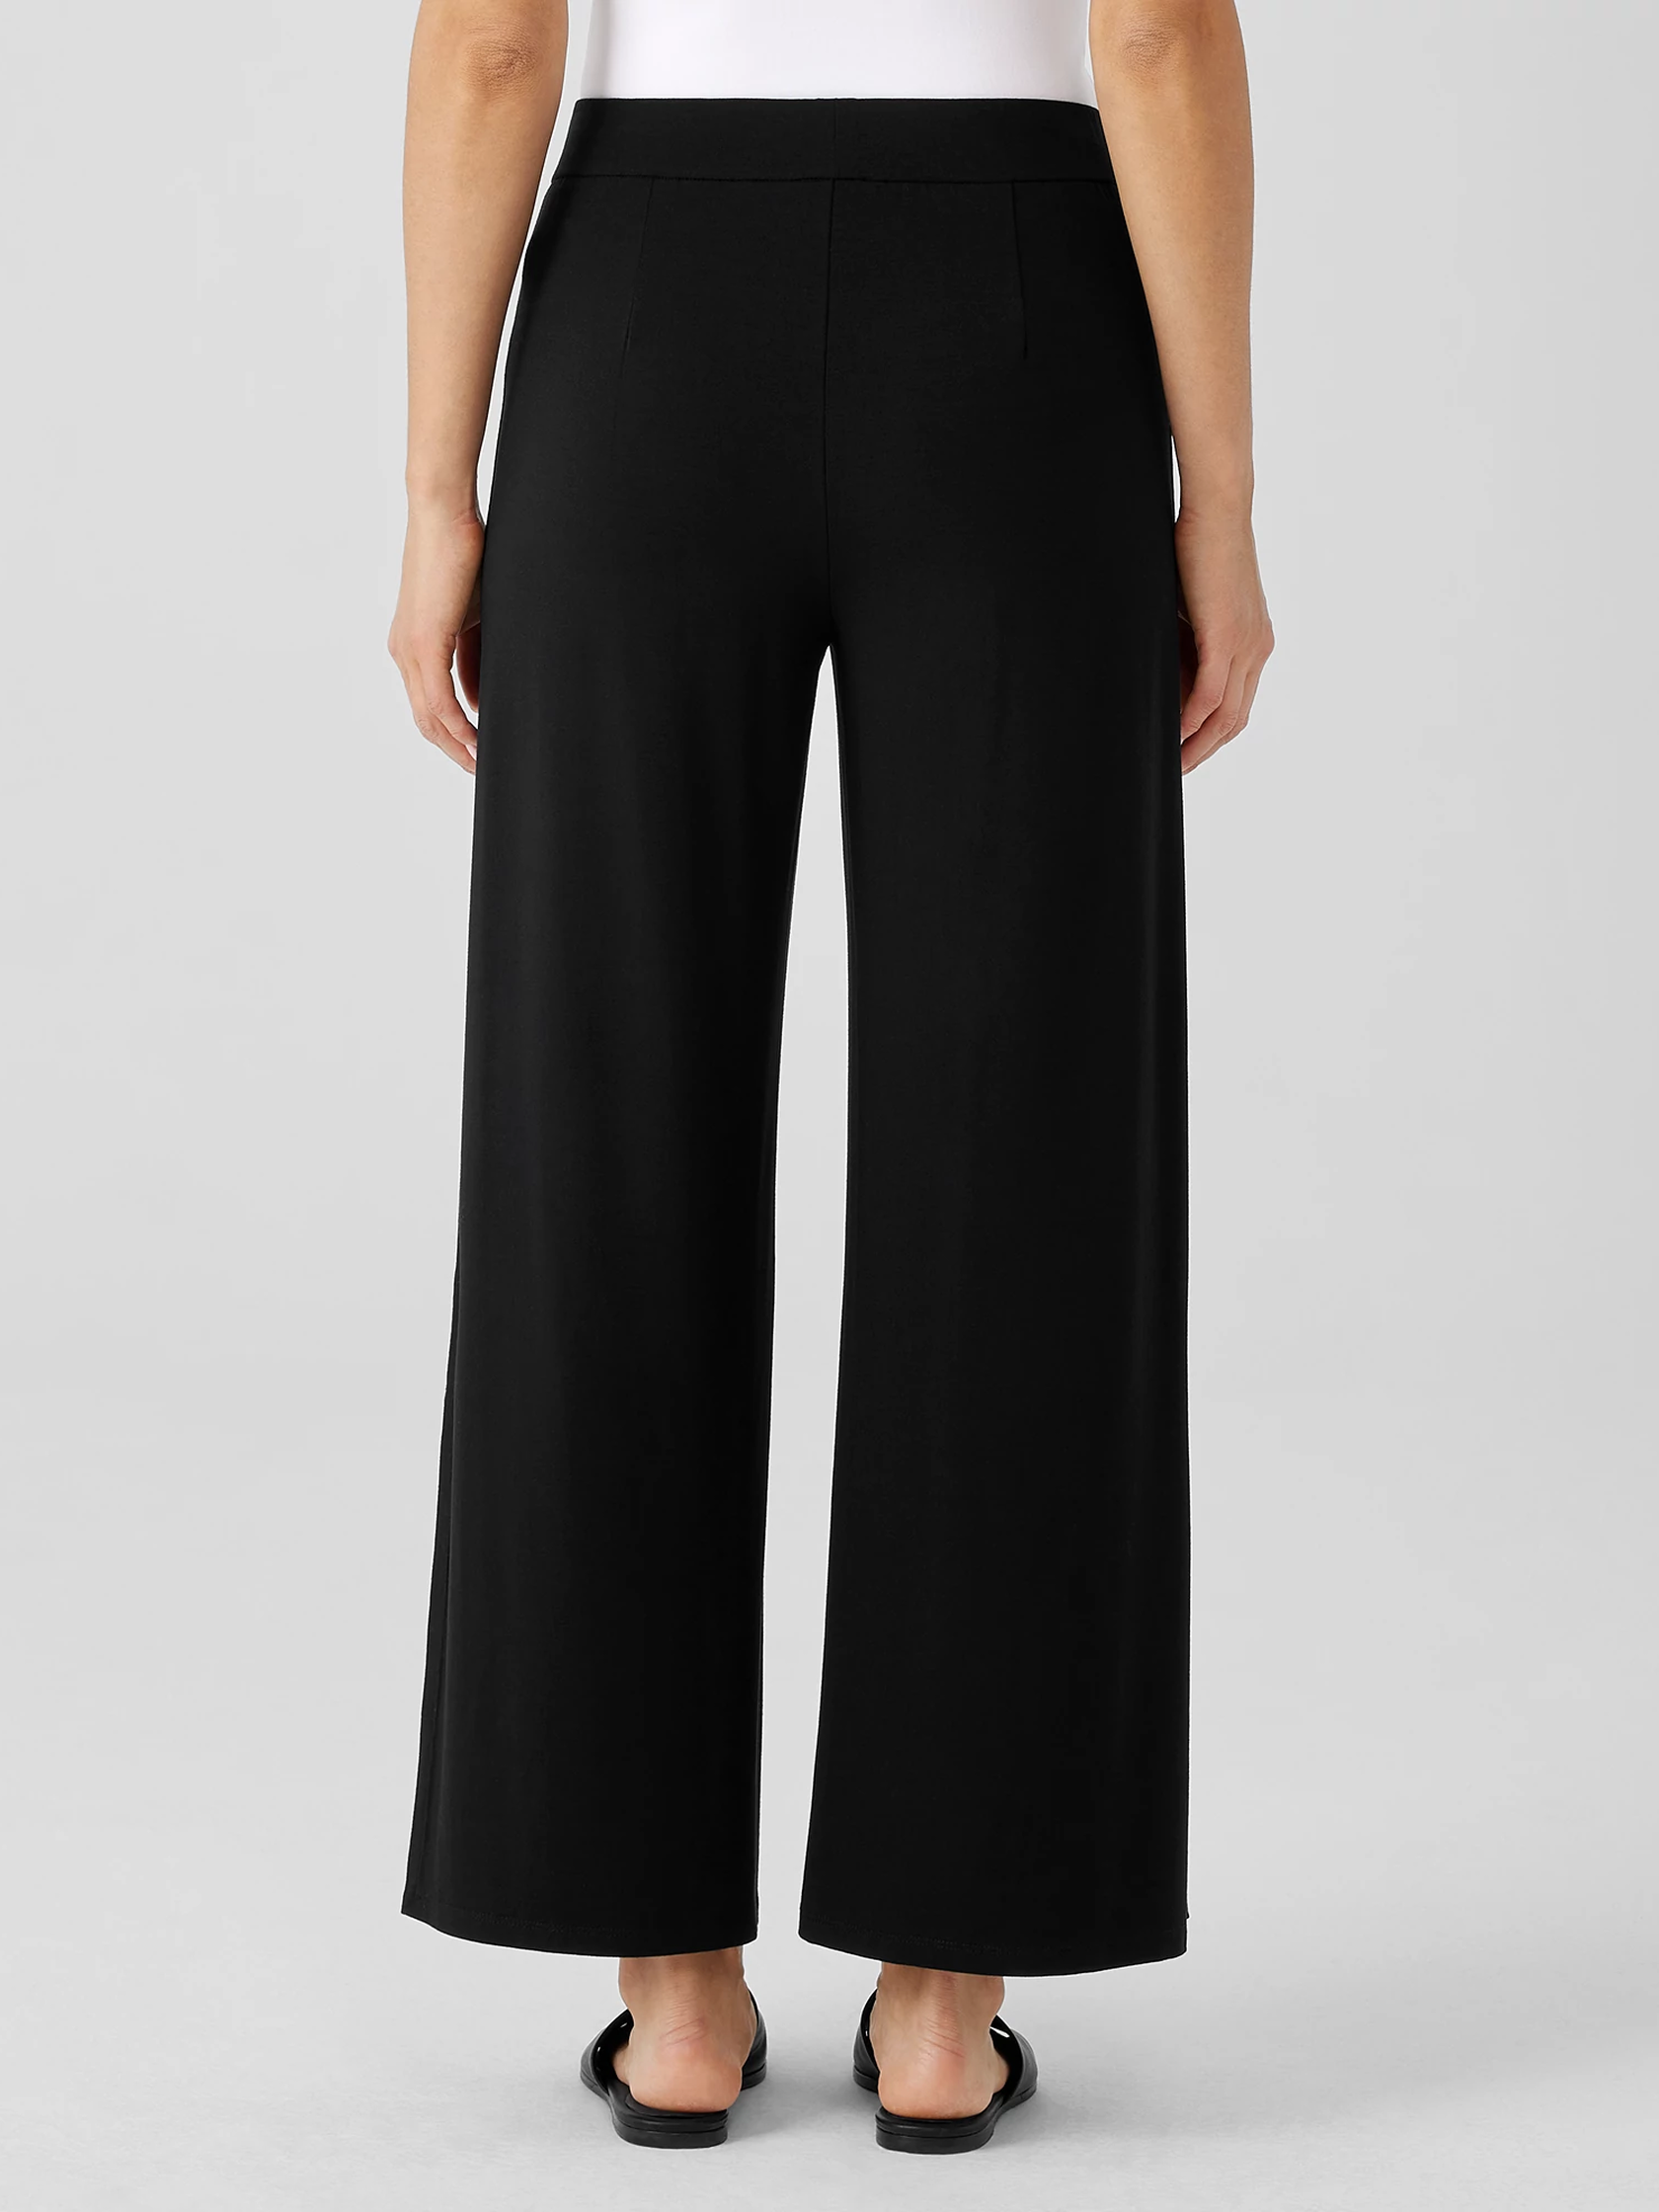 Stretch Jersey Knit Pant with Slits | EILEEN FISHER